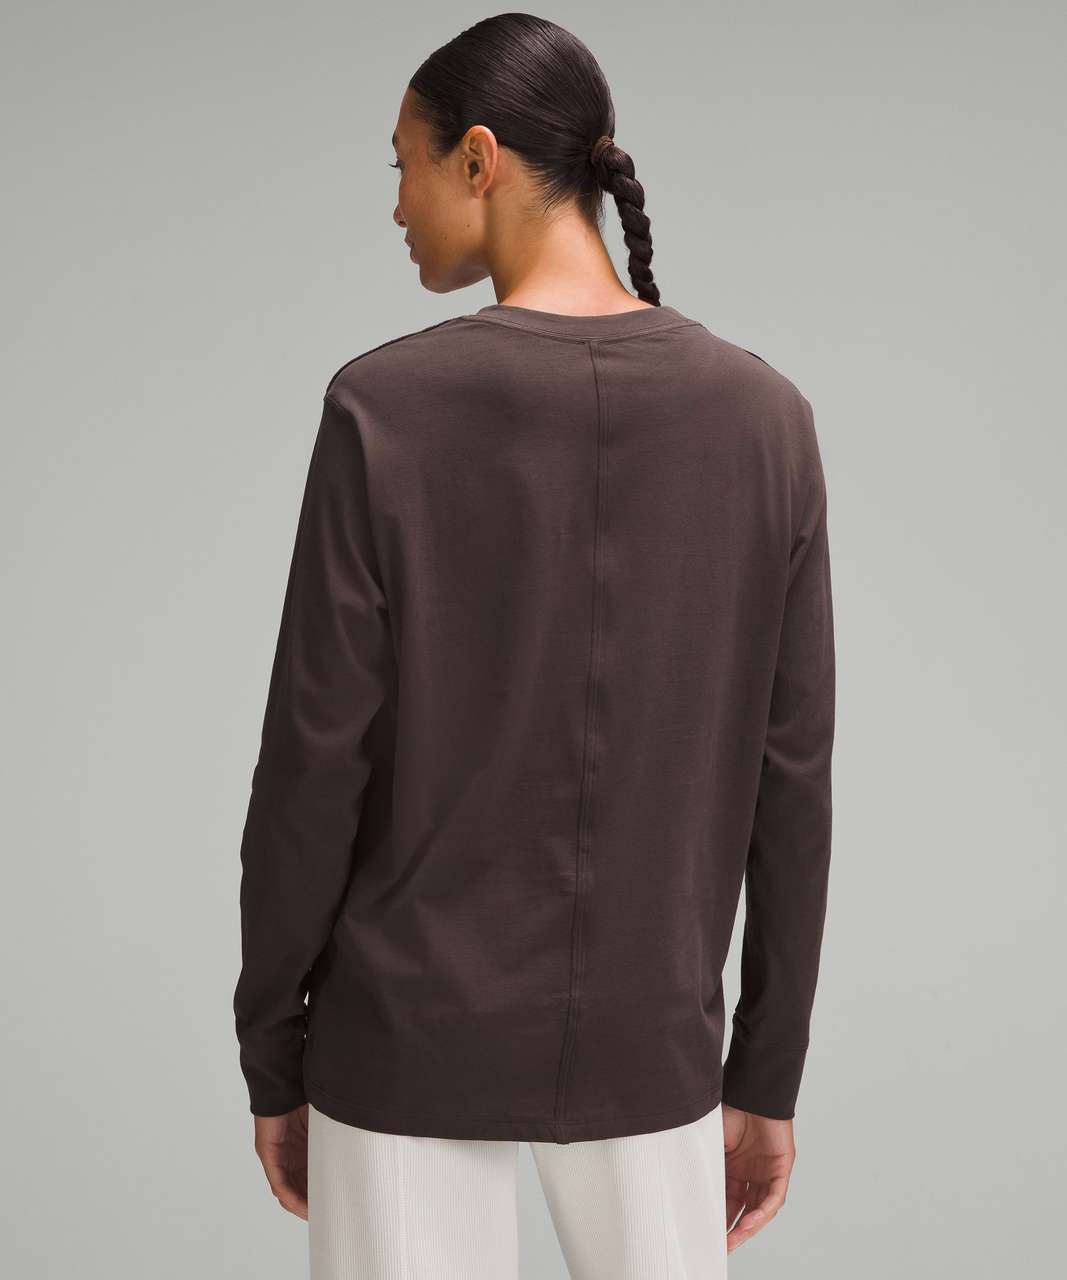 Lululemon All Yours Long-Sleeve Shirt - Espresso (First Release)